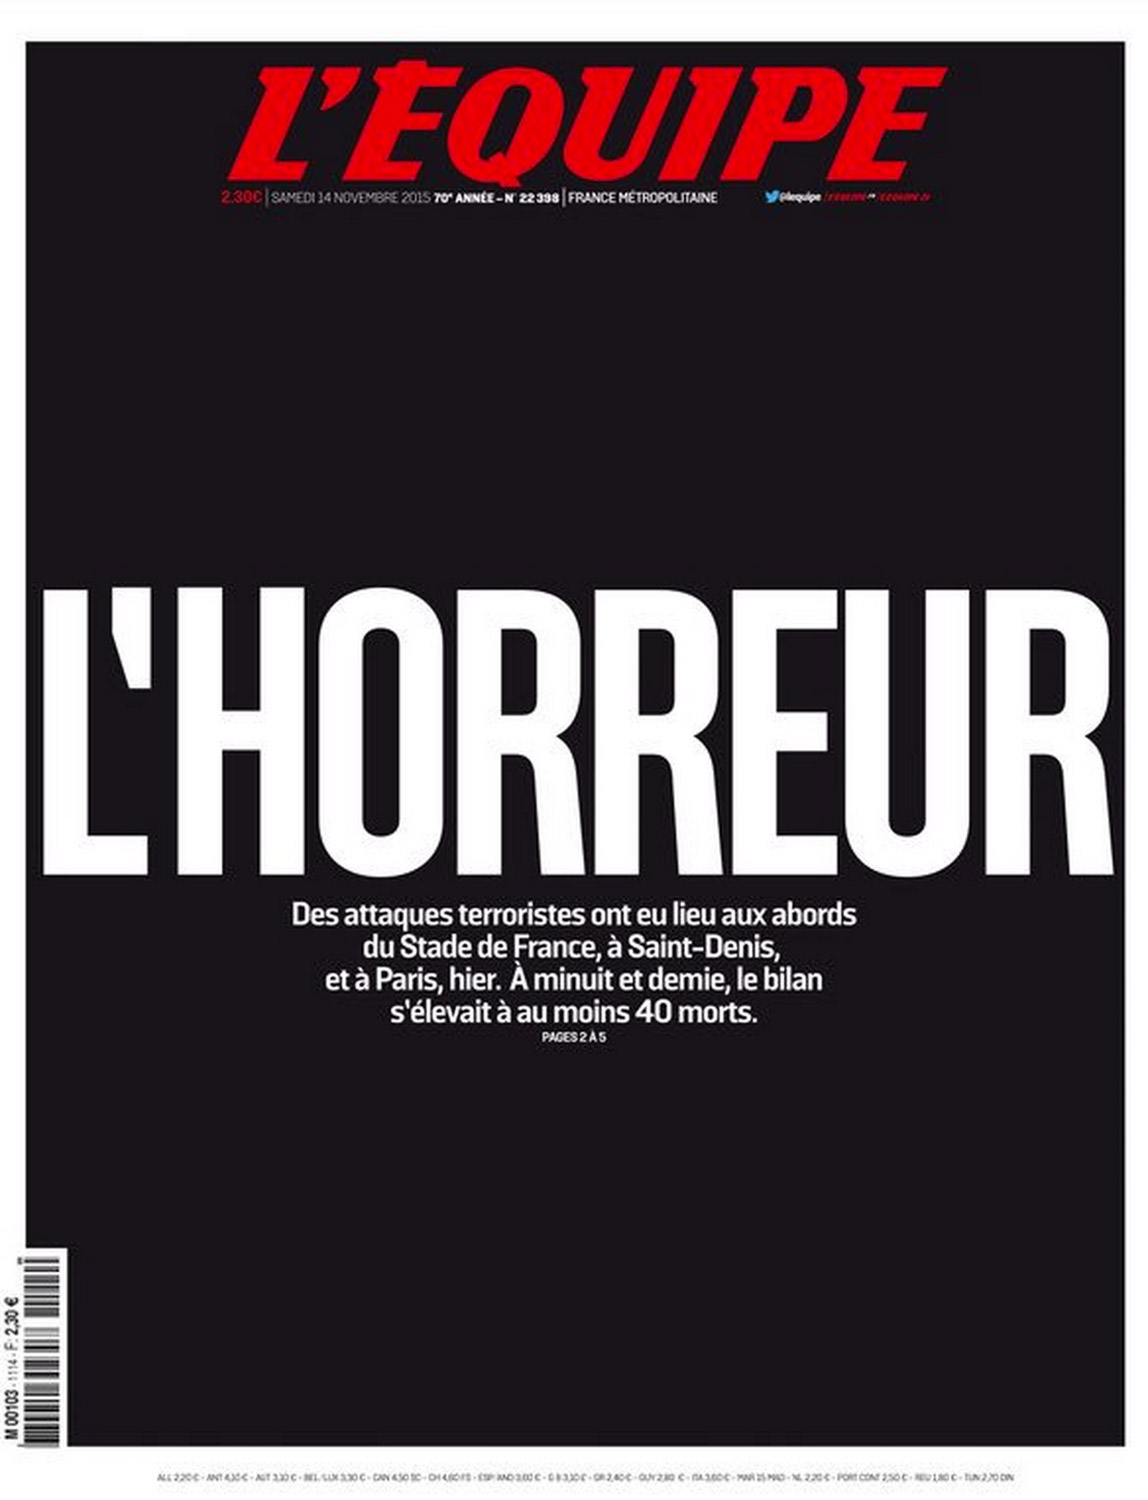 The front page of L'Equipe after the Paris attacks on Nov. 13, 2015